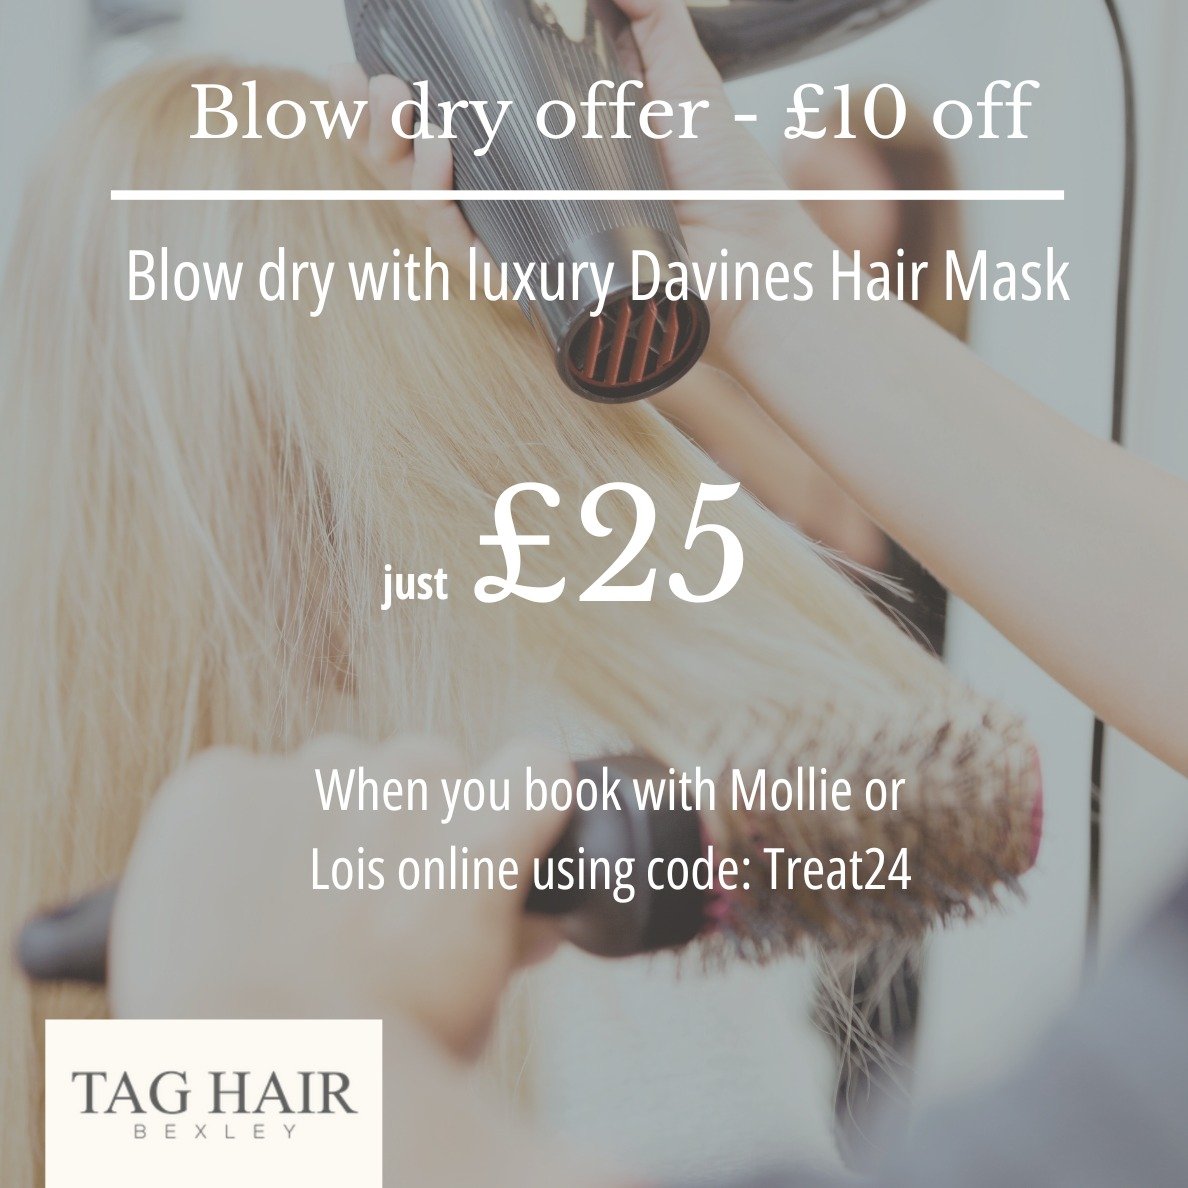 A treat for you, and your hair ✨ Relax and enjoy a luxury hair treatment and beautiful blow-dry with our special offer.... ✨

Book at the website (link in bio) quoting Treat24

#blowdryoffer #davinesoffer #davinessalon #davineshaircare #discountblowd